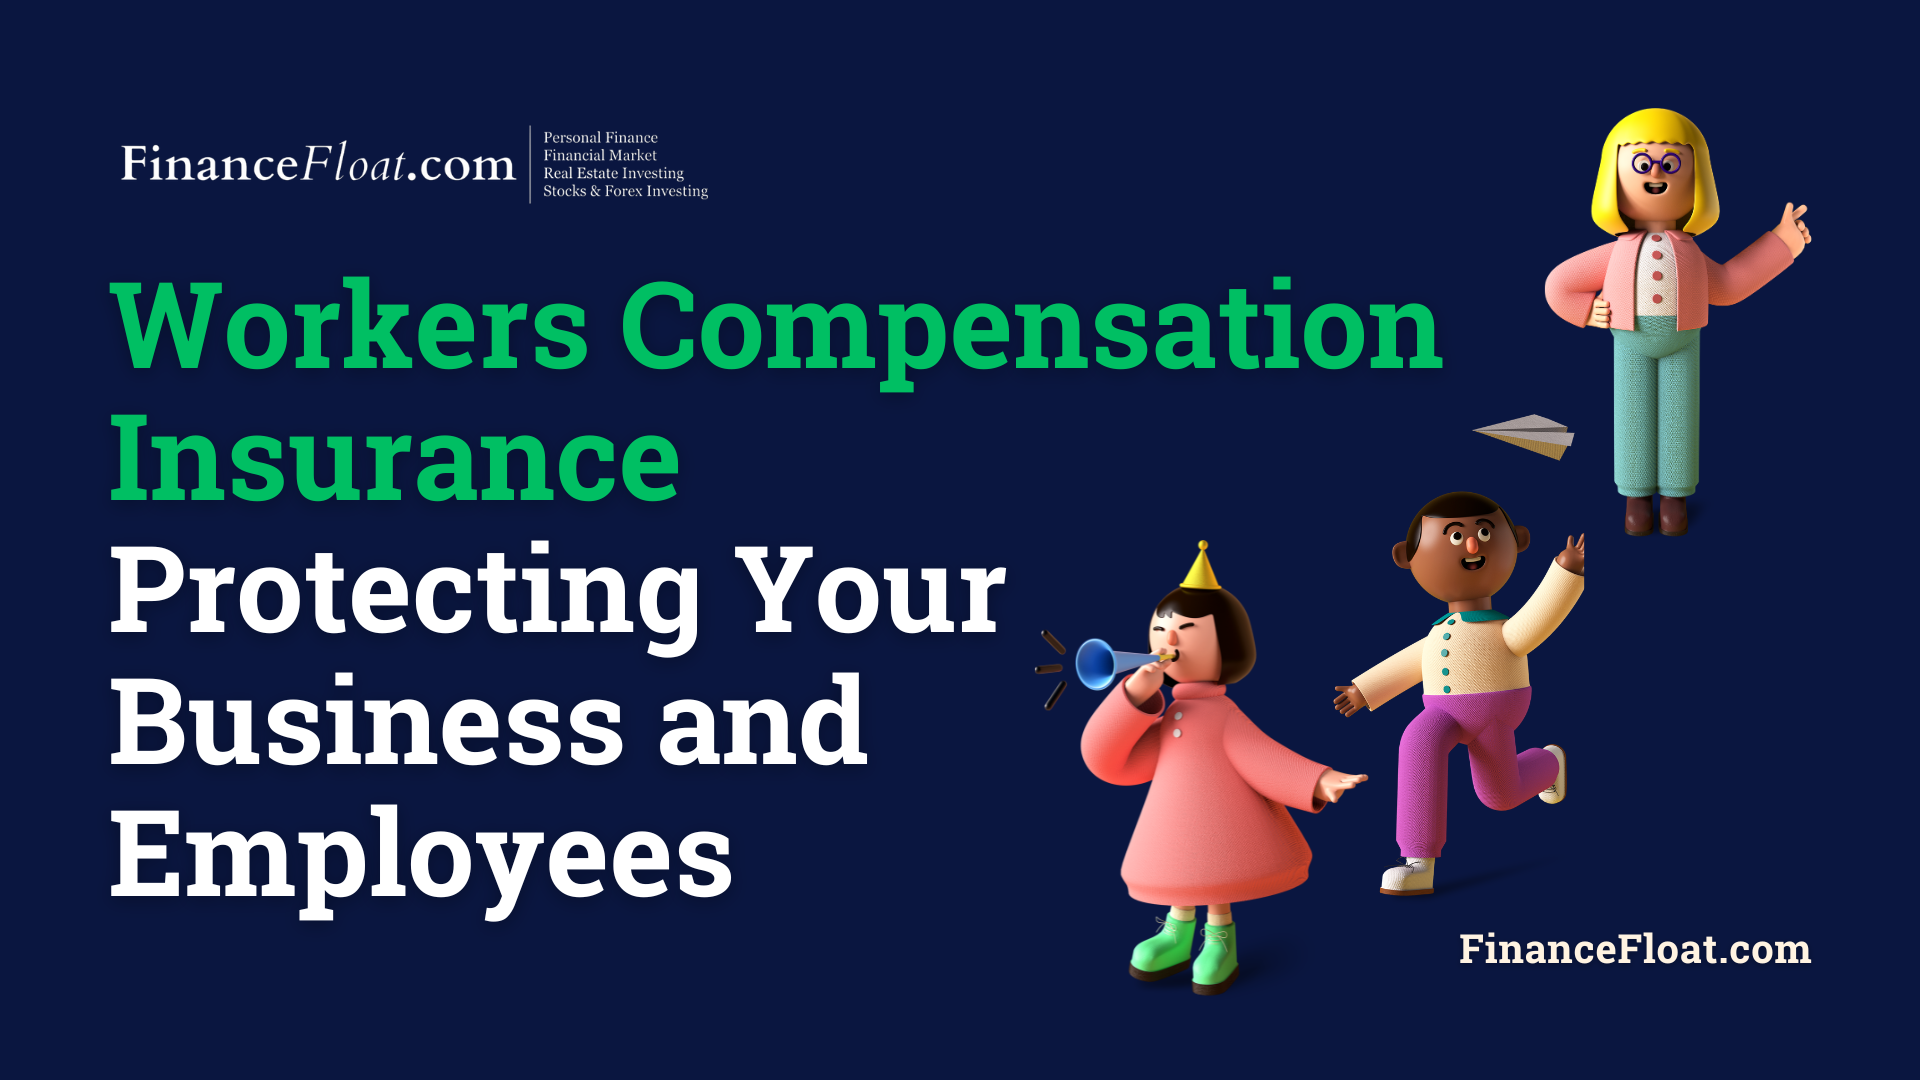 Workers Compensation Insurance Protecting Your Business and Employees